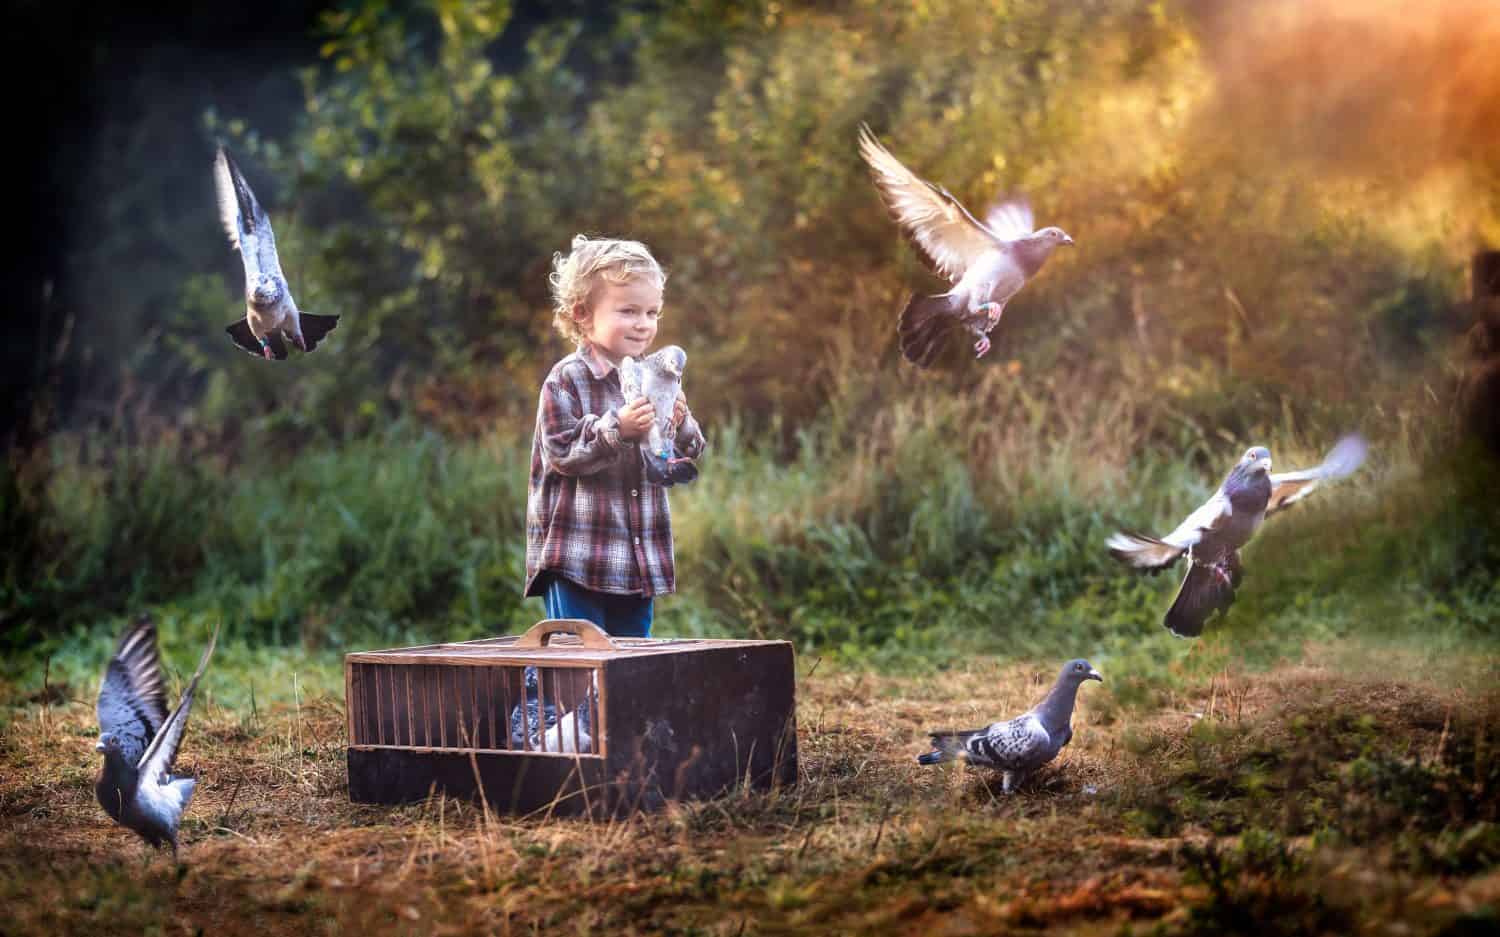 Little pigeon fancier. Boy playing outdoor in autumn or spring scenery with flying pigeons.